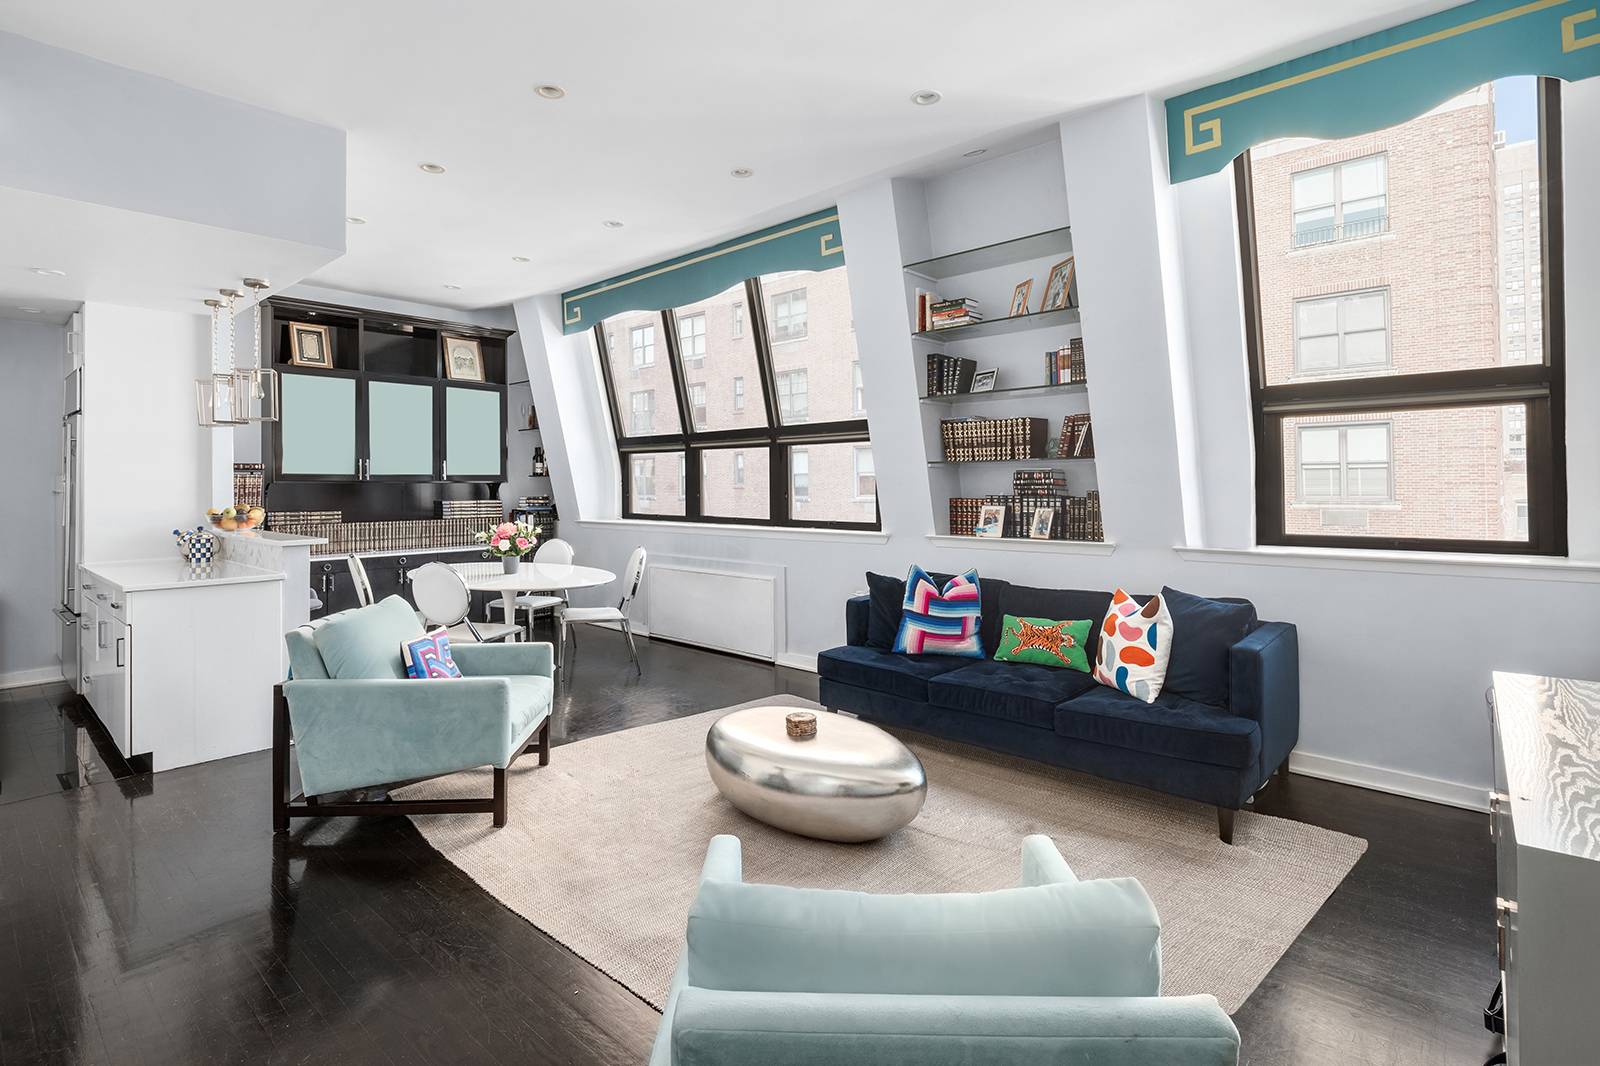 112 East 83rd Street offers a unique and inspiring living space in the heart of the Upper East Side.